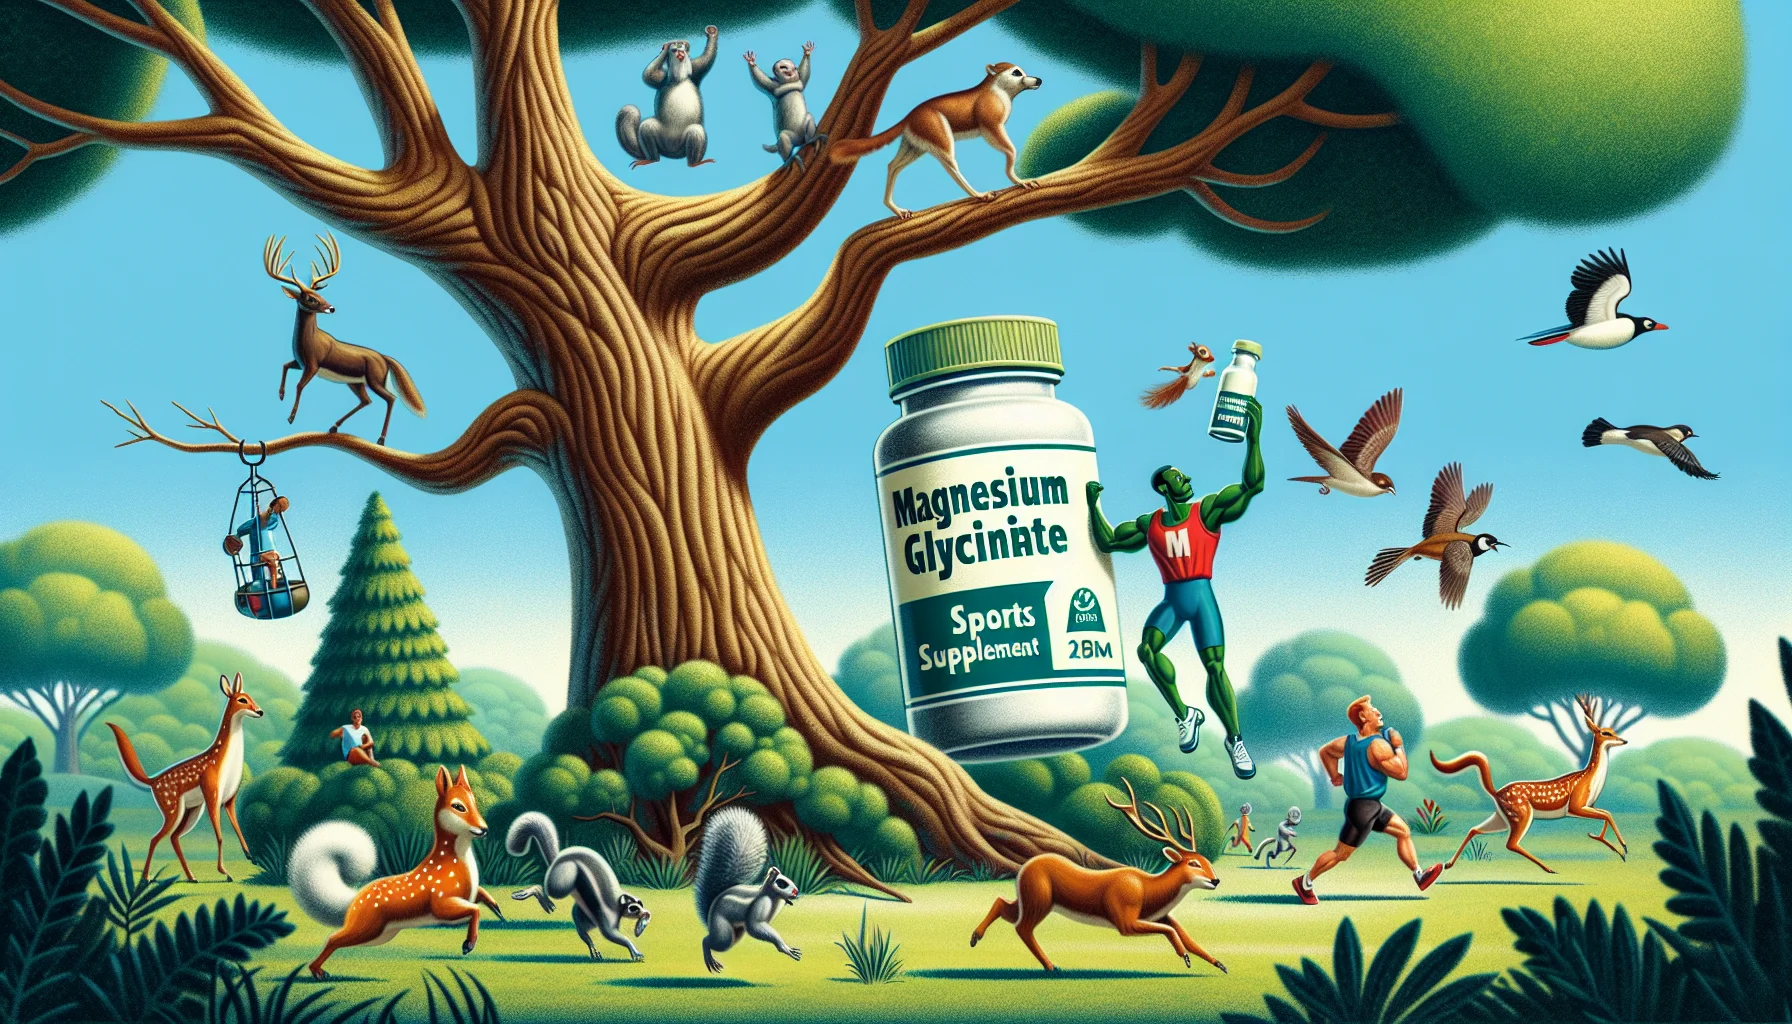 Illustrate a hilarious scene taking place in the outdoors, where nature itself is promoting magnesium glycinate, a popular sports supplement. The personification of nature might be depicted as a towering, sturdy tree with human-like features, tapping a bottle labelled 'Magnesium Glycinate' with a branch, like a gym trainer promoting a protein shake. Around it, diverse wildlife like squirrels, birds or deer could be exhibiting increased athleticism, performing extraordinary feats like executing perfect somersaults or racing at incredible speeds. The scene should have a light-hearted and enticing ambiance, thereby making the idea of using sports supplements appear both attractive and funny.